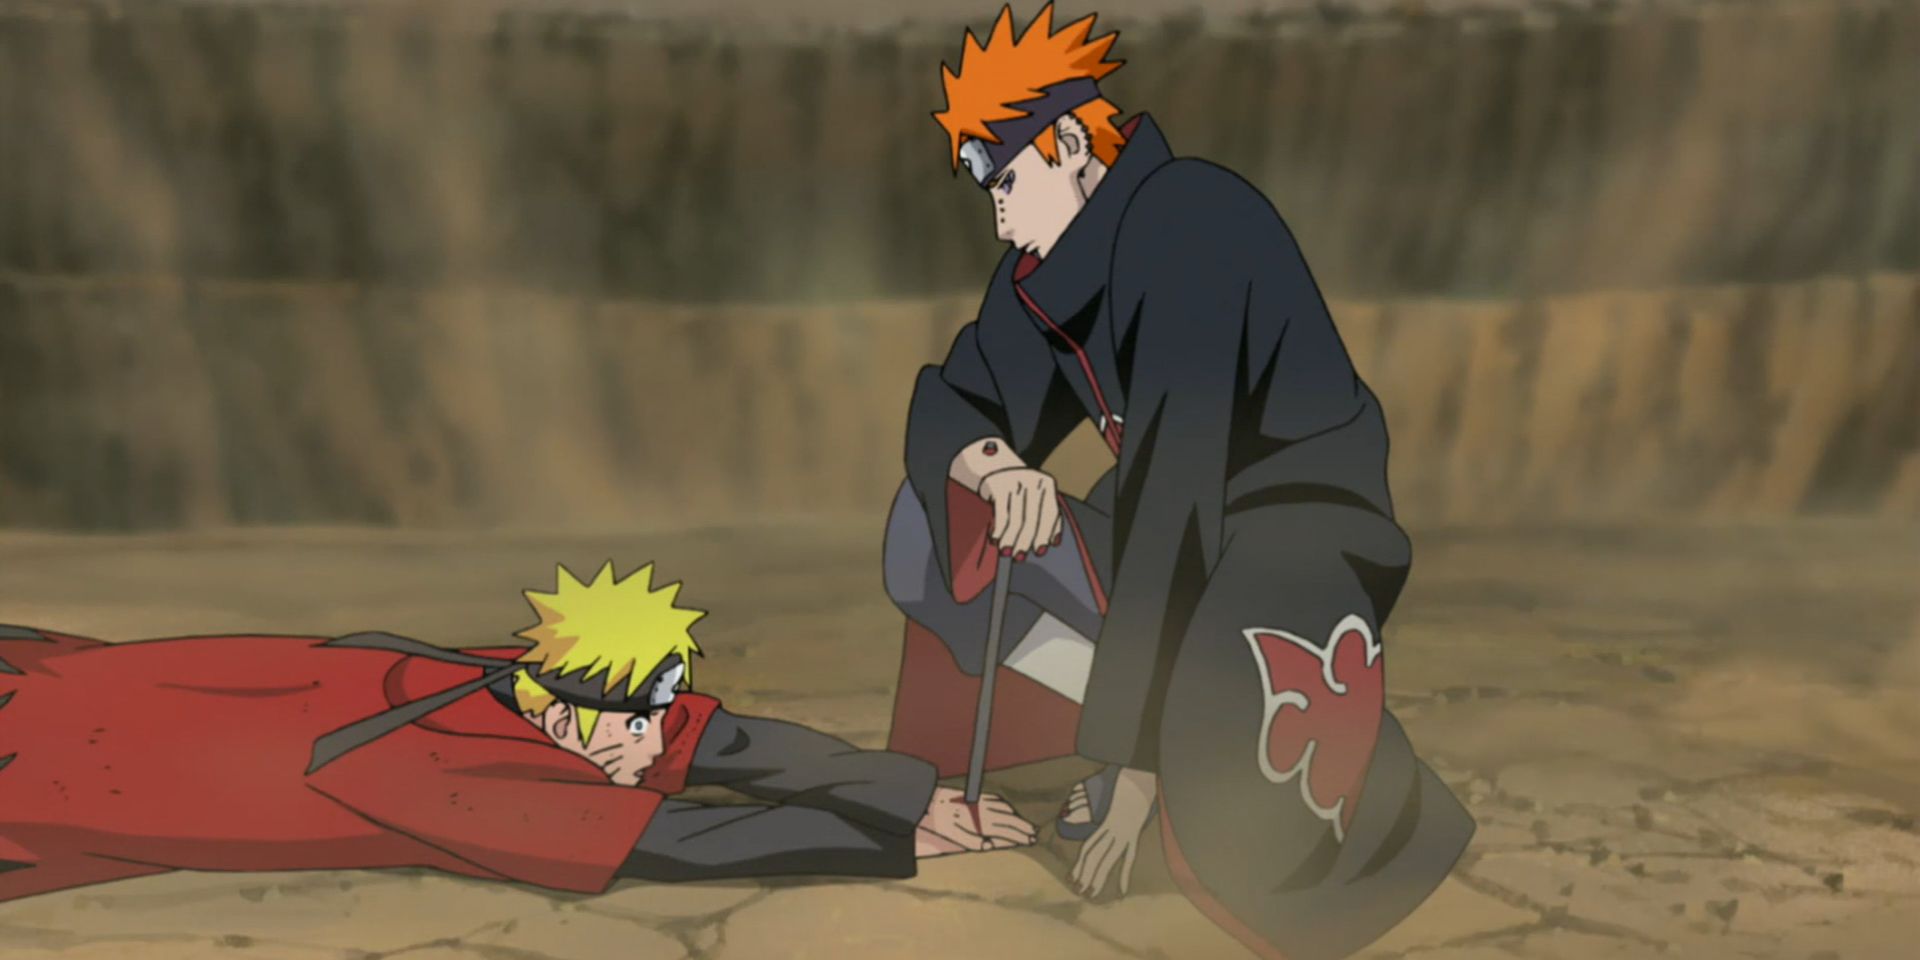 Naruto 10 Longest Arcs In The Anime Series Ranked By Total Episodes RELATED Naruto 10 Weirdest Story Arcs In The Anime Series Ranked